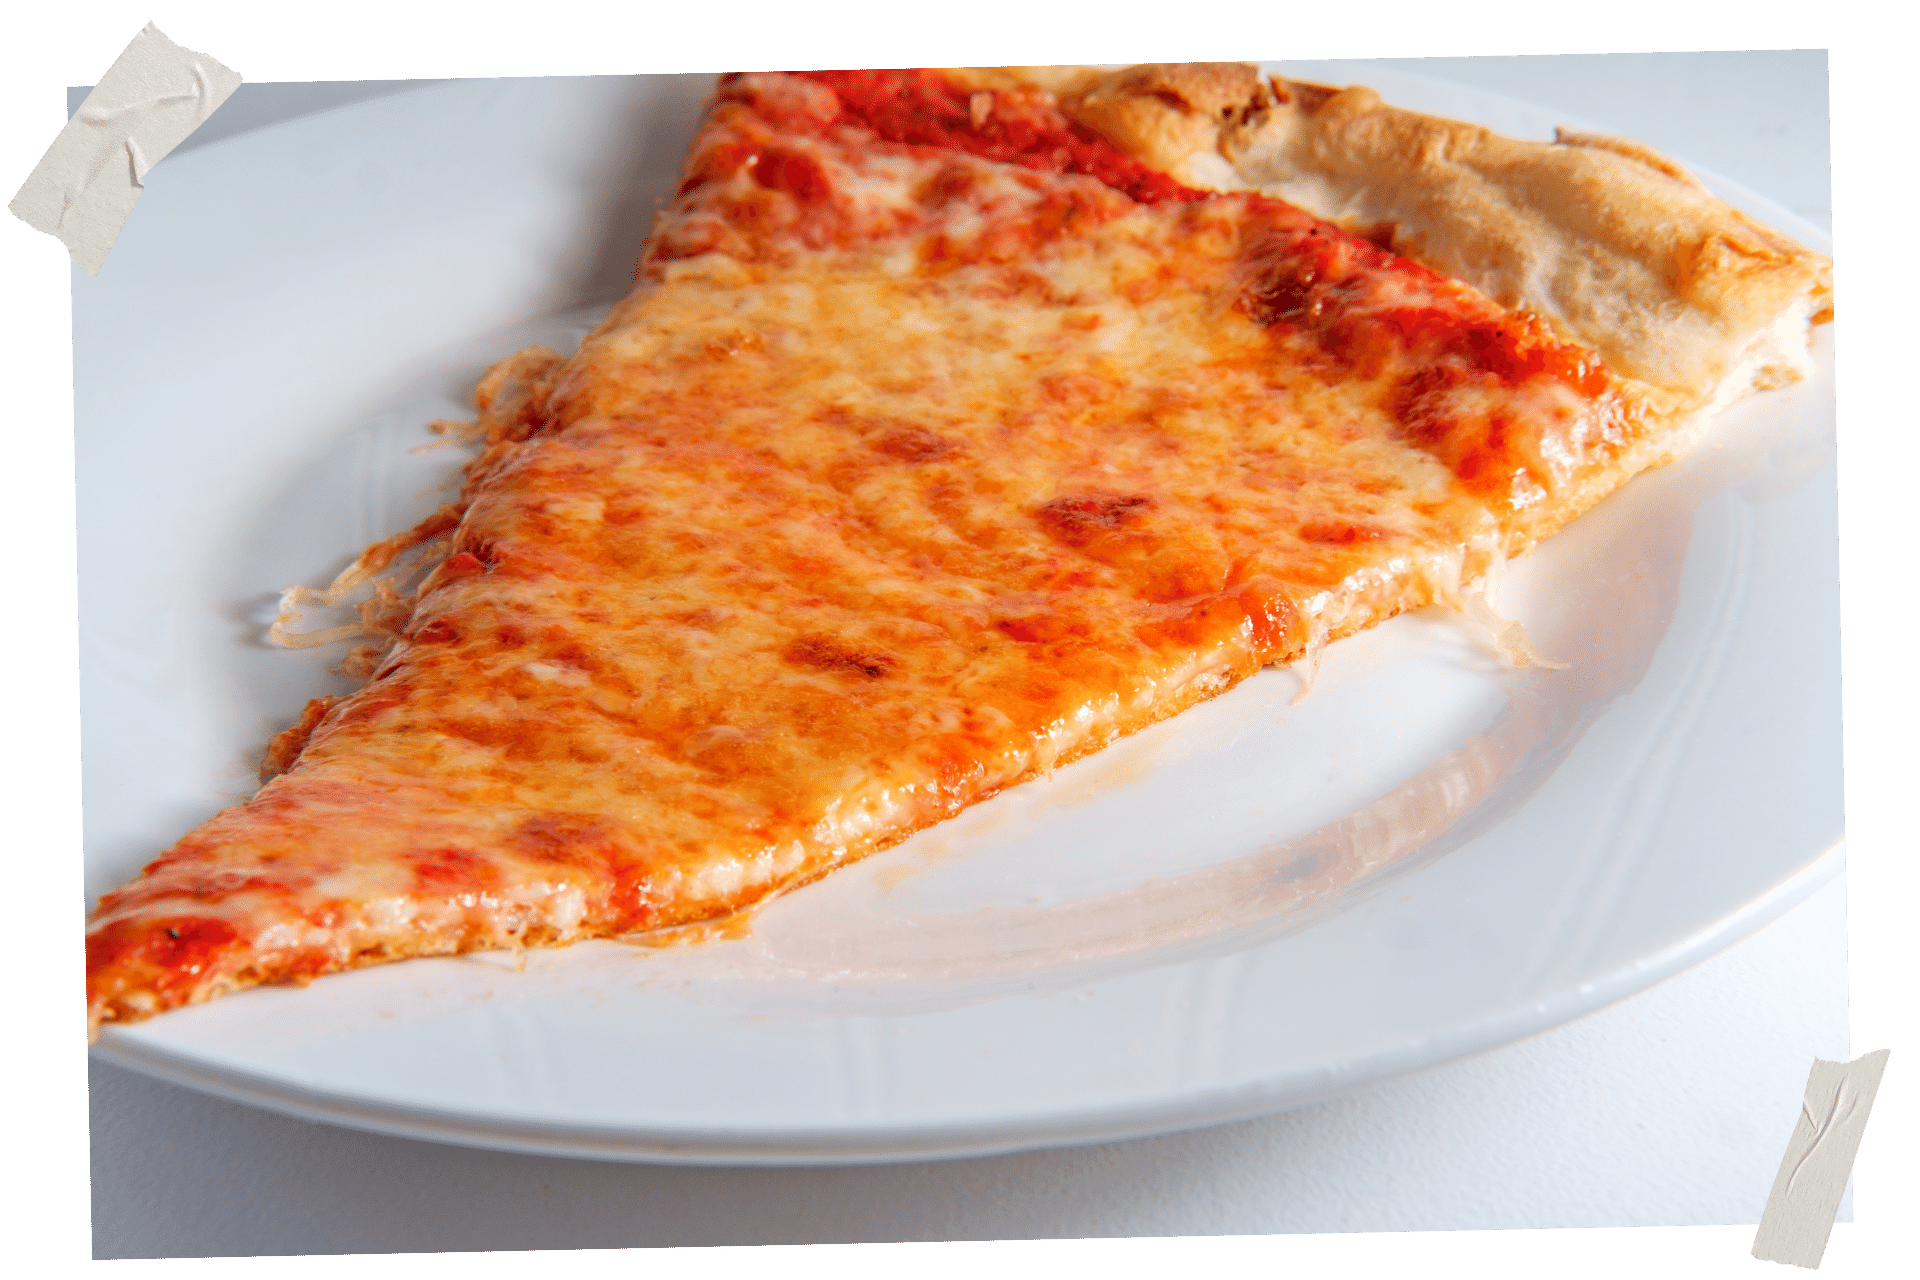 When it comes to New York for Foodies, a classic pizza slice is number one on the list. Pictured is a plane cheese slice on a white plate against a white background.